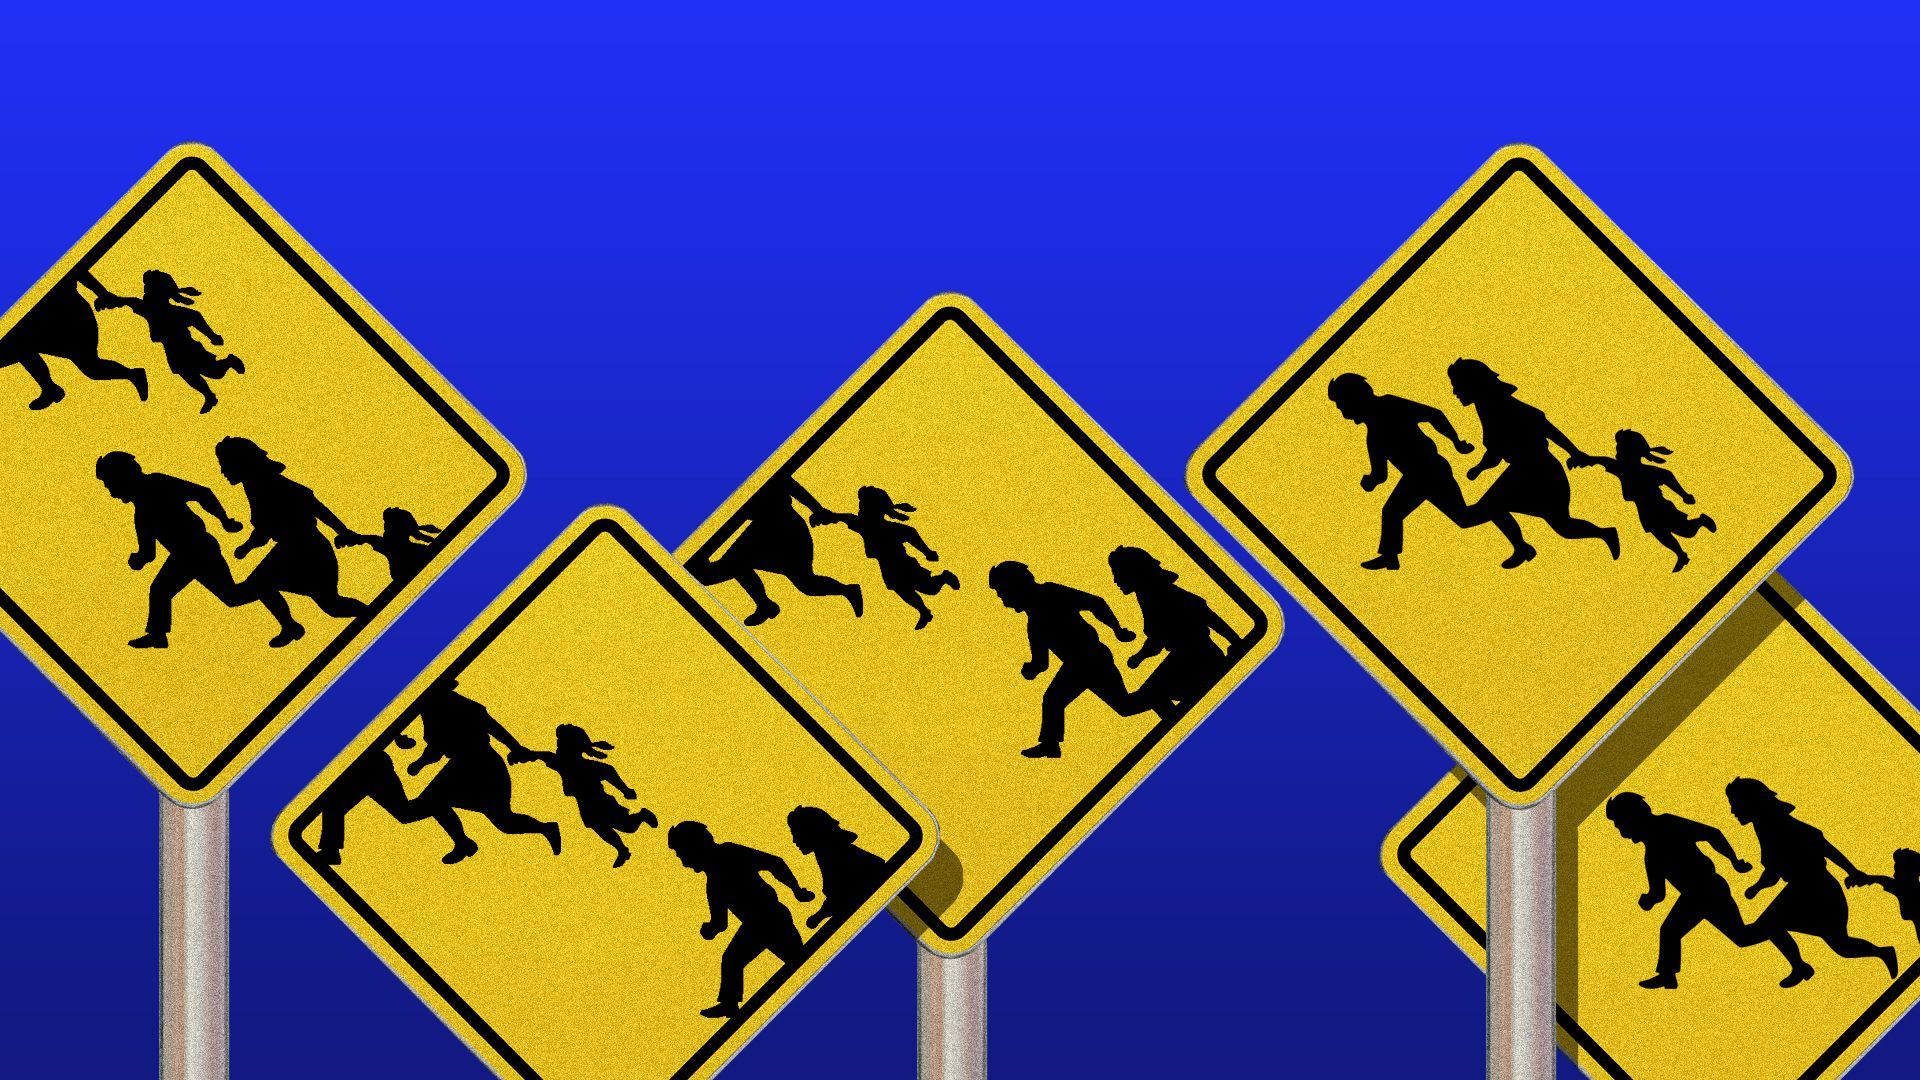 Illustration of yield signs showing running kids 